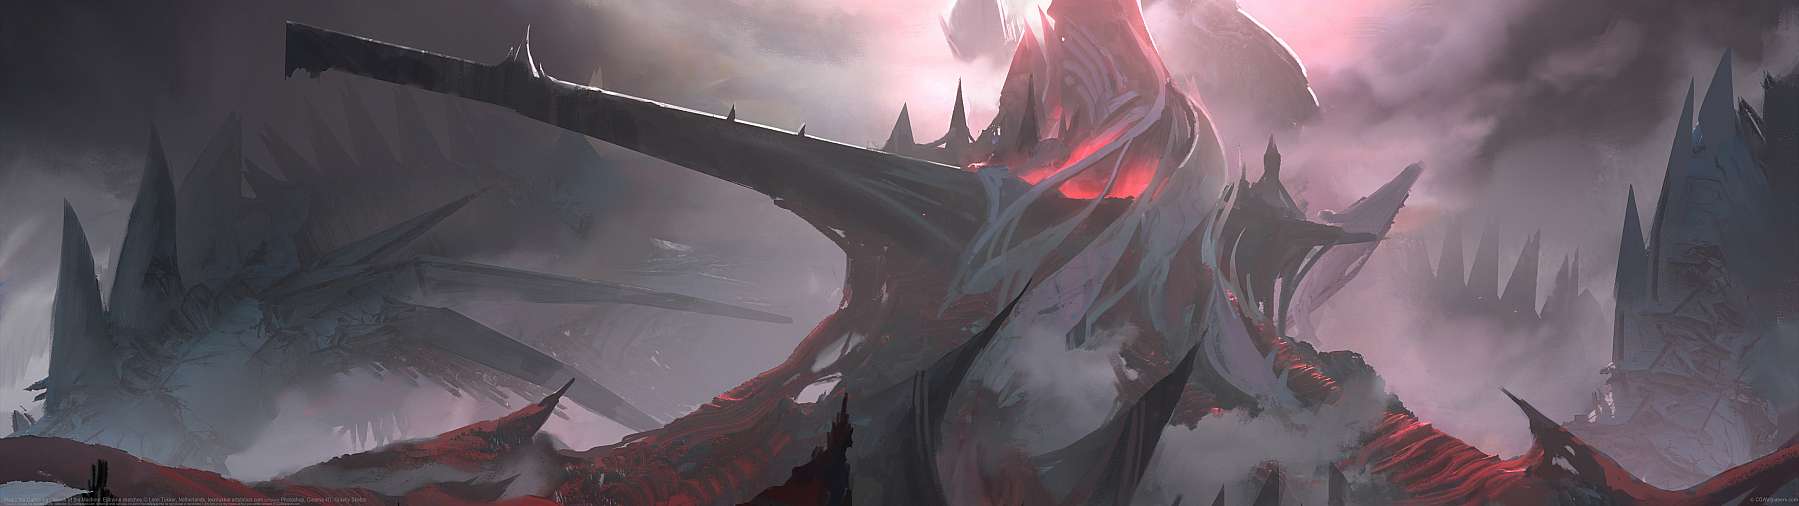 Magic the Gathering - March of the Machine: Eldraine sketches ultralarge fond d'cran